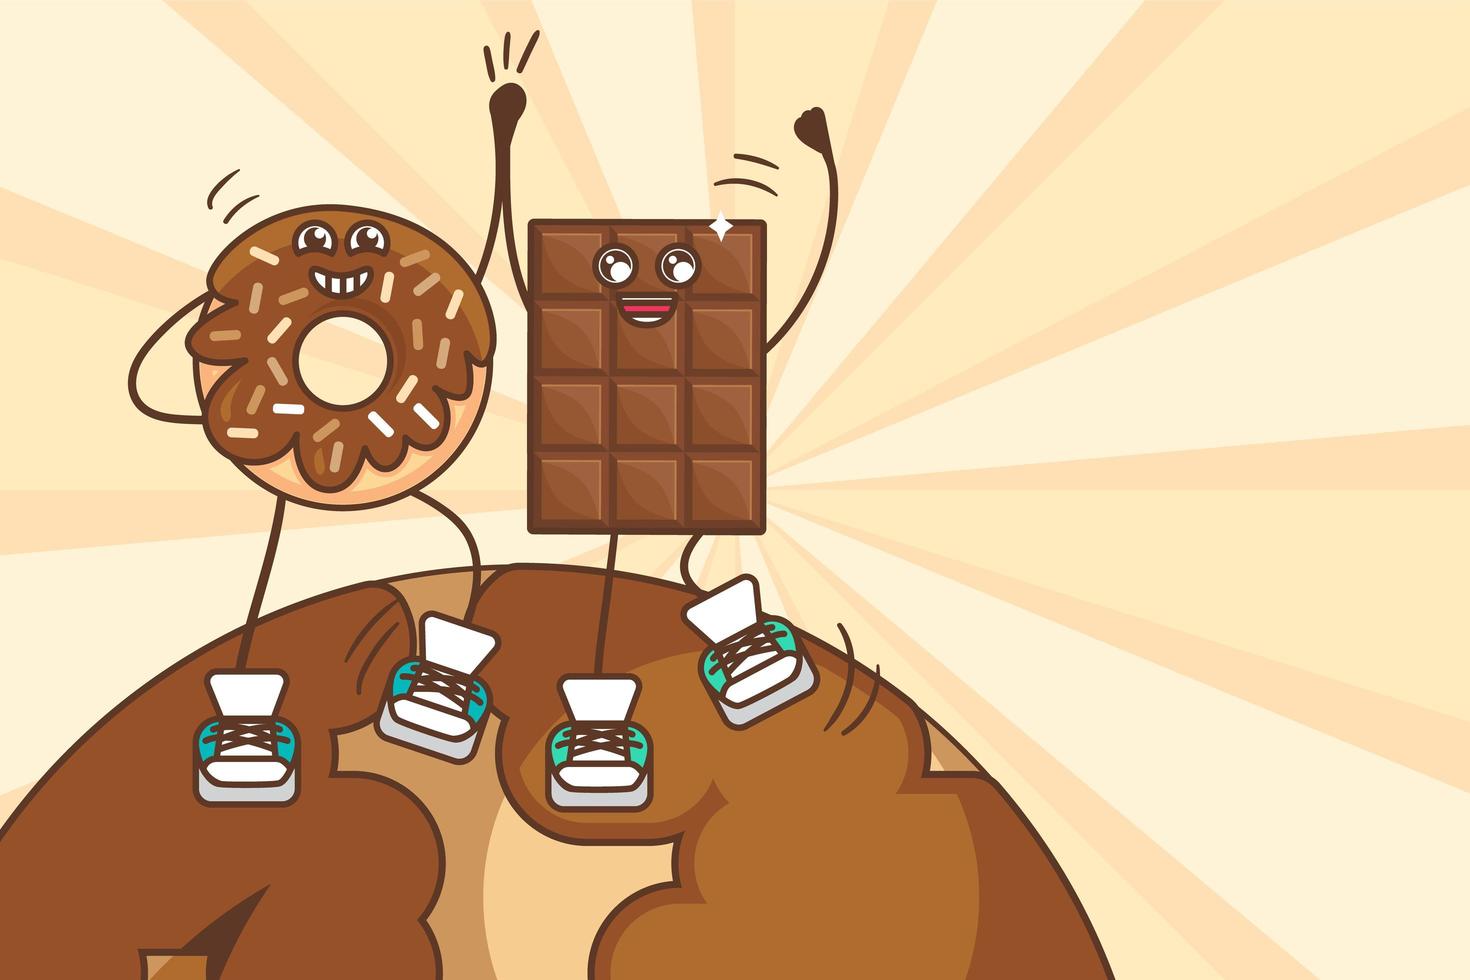 World Chocolate Day Illustration With Dancing Sweet Donut And Chocolate Bar Characters vector